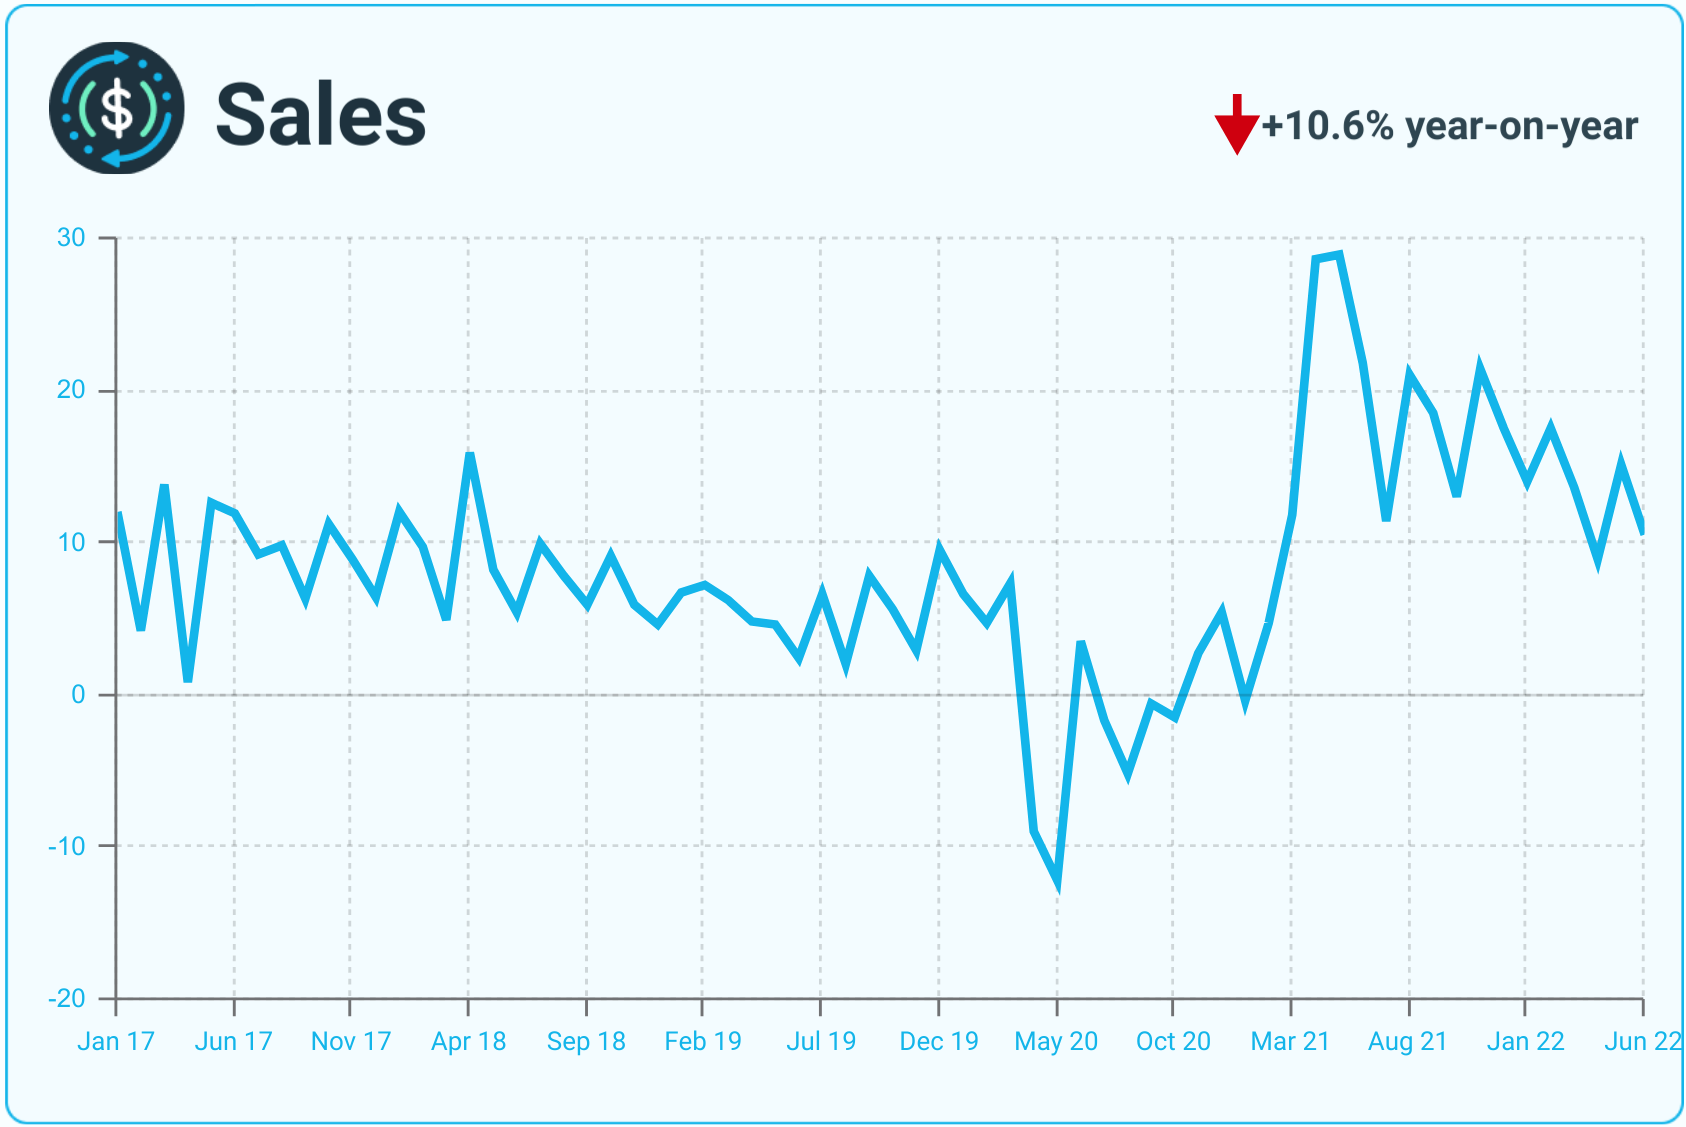 A line graph showing monthly metrics for sales.